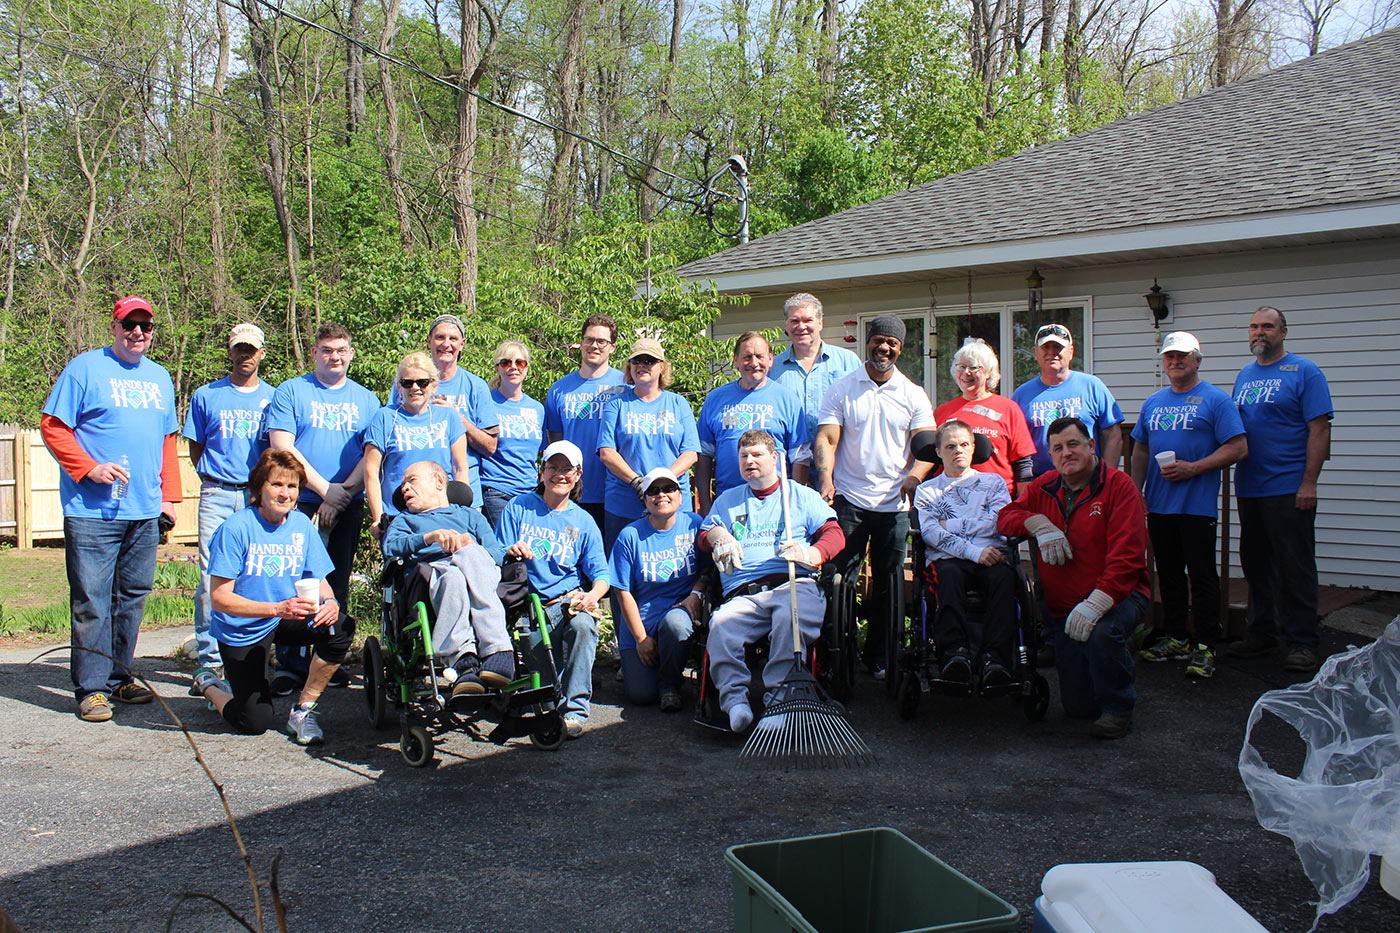 Members pose for group photo after spring clean-up